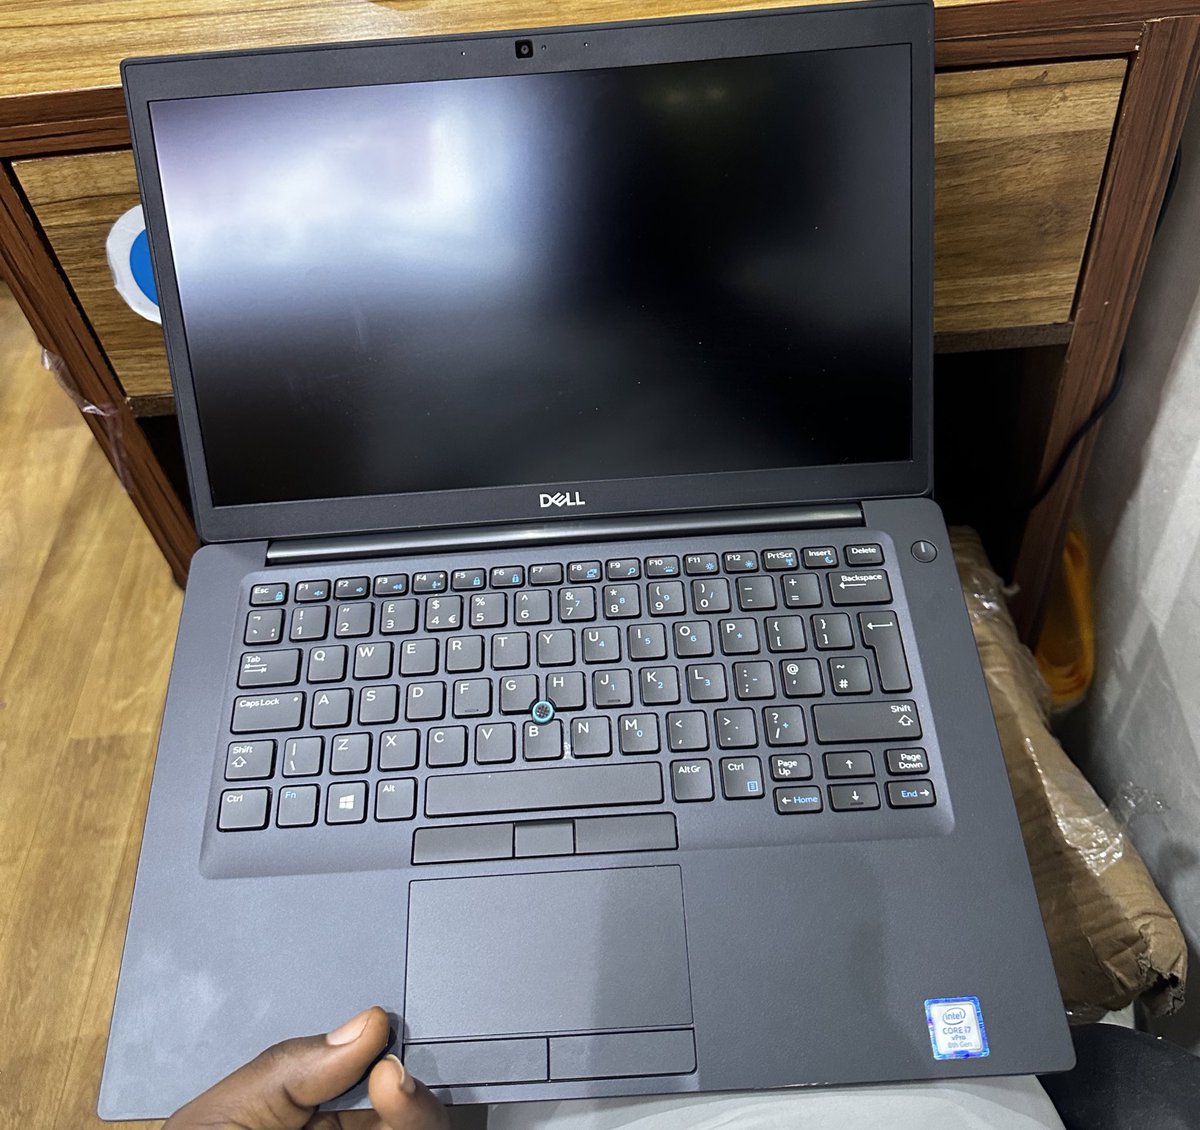 🇺🇸US Used
14inches
Dell Latitude 7480 Available!
8gb ram | 256SSD
Core i5 6th Gen 
Non-Touchscreen 
Backlit Keyboard
Good Battery 
Comes with Charger
Neat

Price: ₦205,000 Only 

To Place Order & Delivery ⤵️
DM/Call/Whatsapp +2348132727945

Kindly RT❤️🙏🏾

#GeekTech